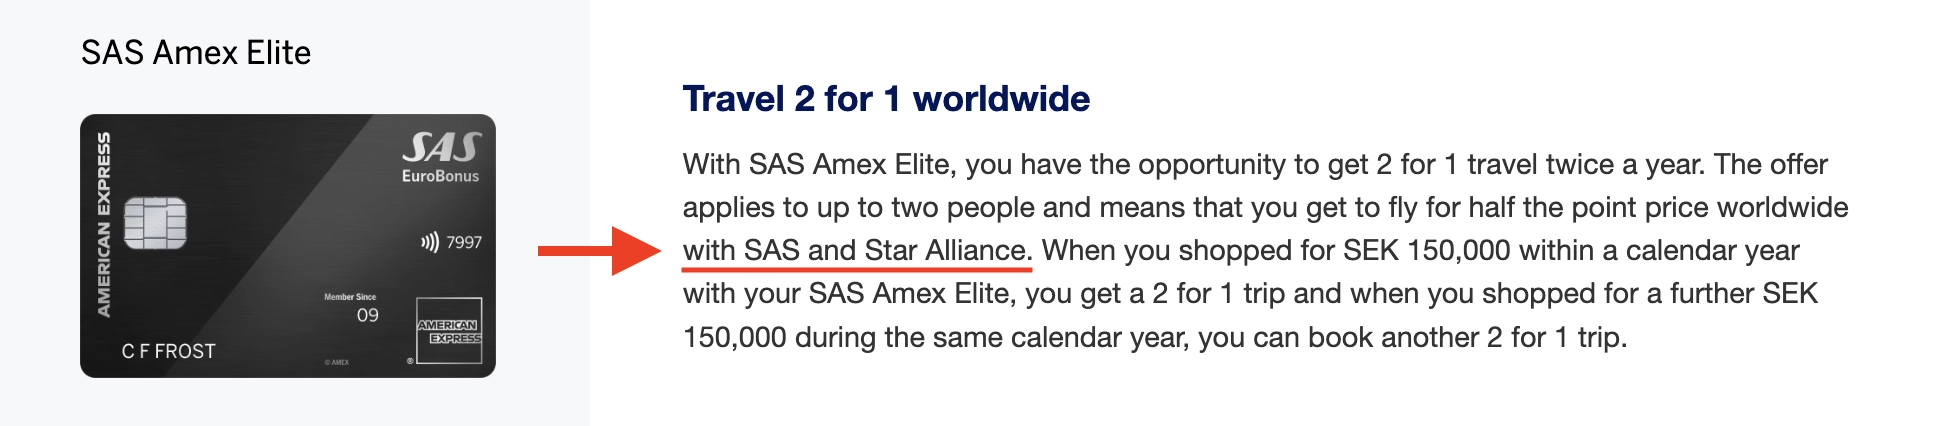 SAS Amex Elite 2 for 1 vouchers will stop working for Star Alliance. Will they work for SkyTeam?.